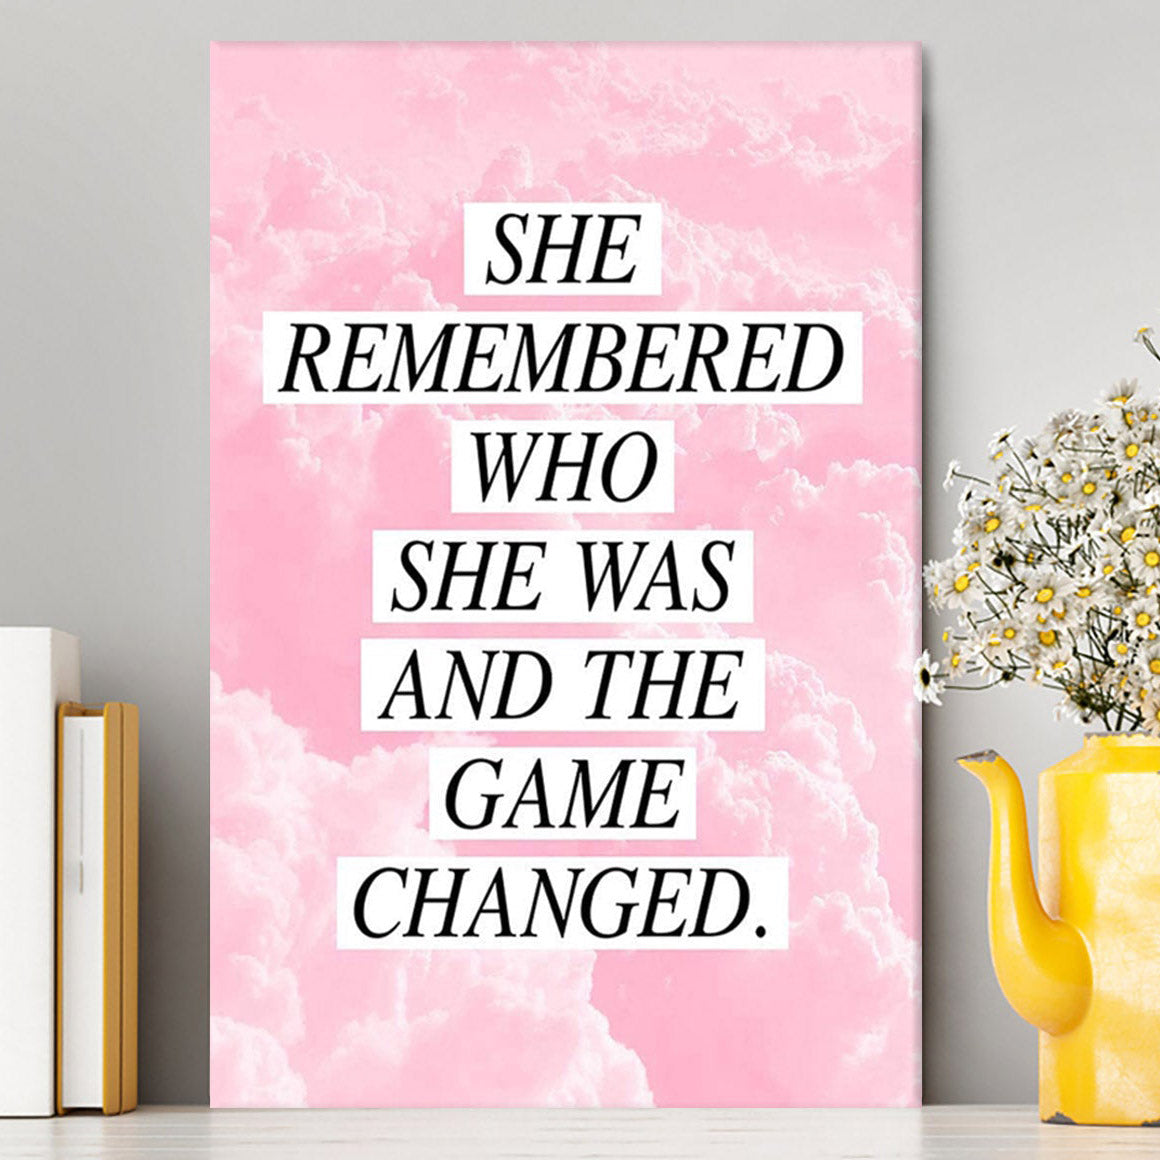 She Remembered Who She Was And The Game Changed Canvas Prints - Encouragement Best Friend Gift For Teens, Women, Girls, Bff